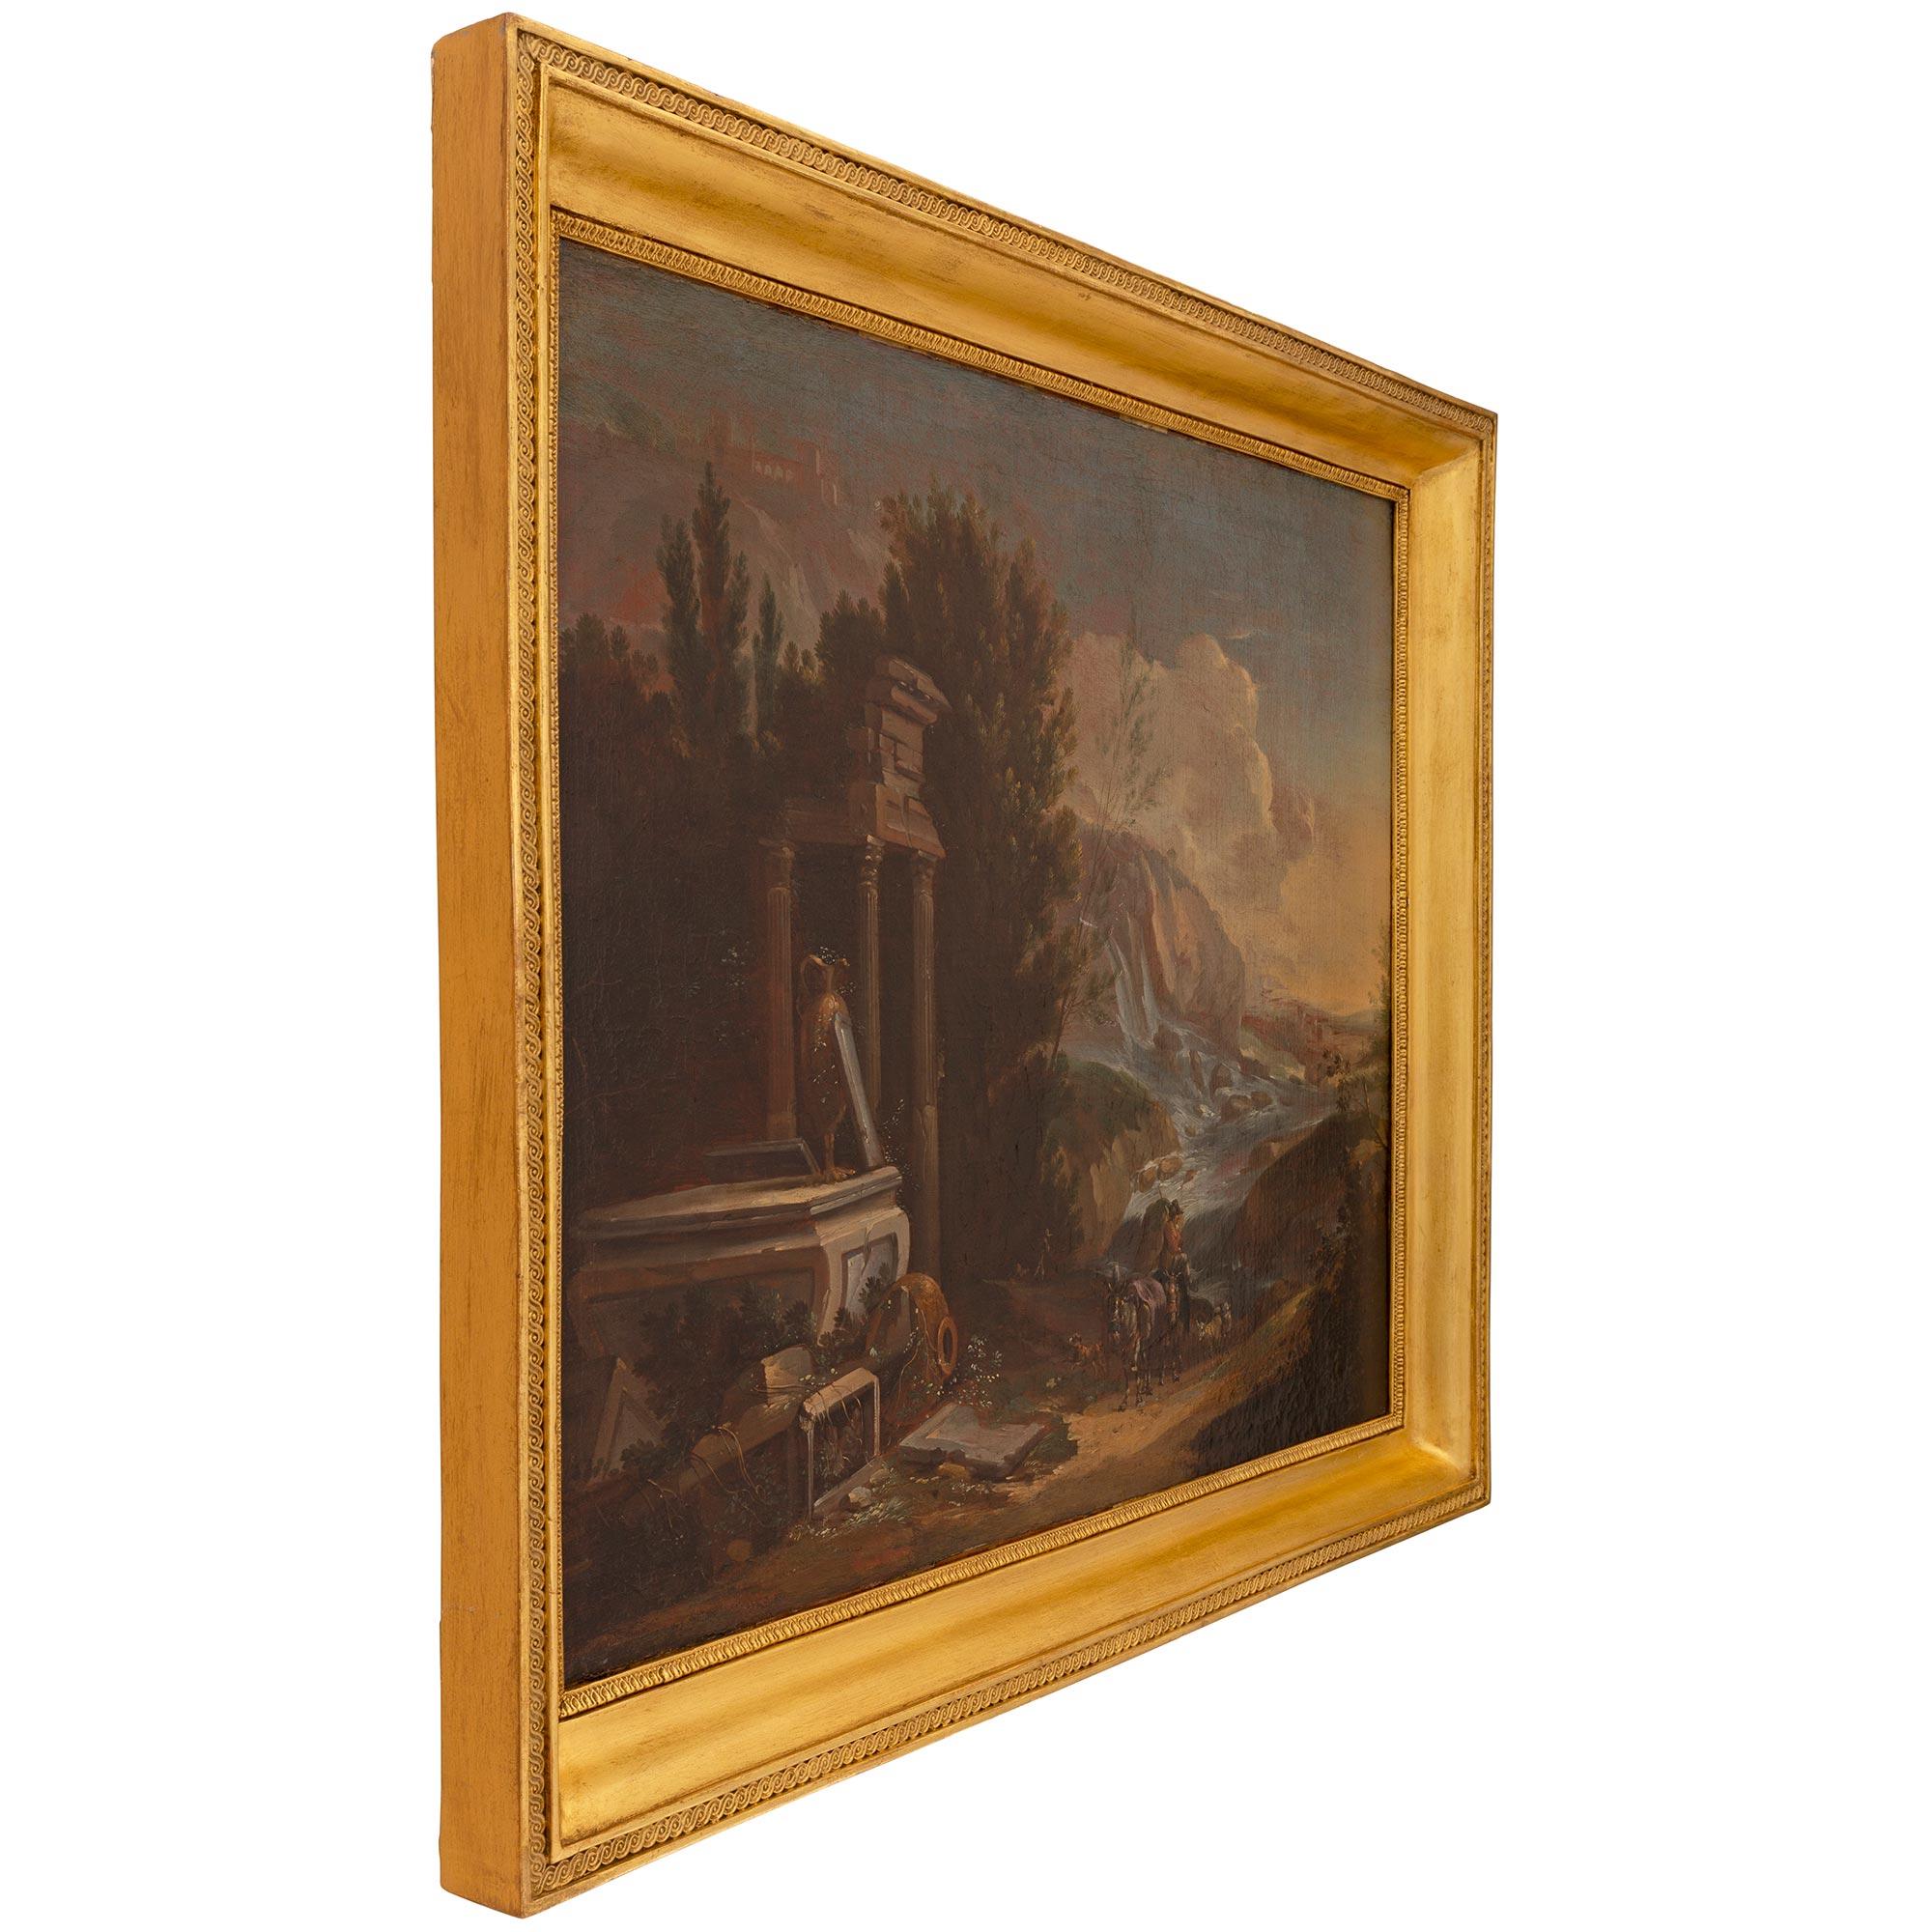 A superb Italian 19th century oil on canvas painting in its original giltwood frame. The wonderfully executed painting depicts a beautiful Italian countryside at sunset with mountains in the background with a magnificent waterfall and river. Fallen